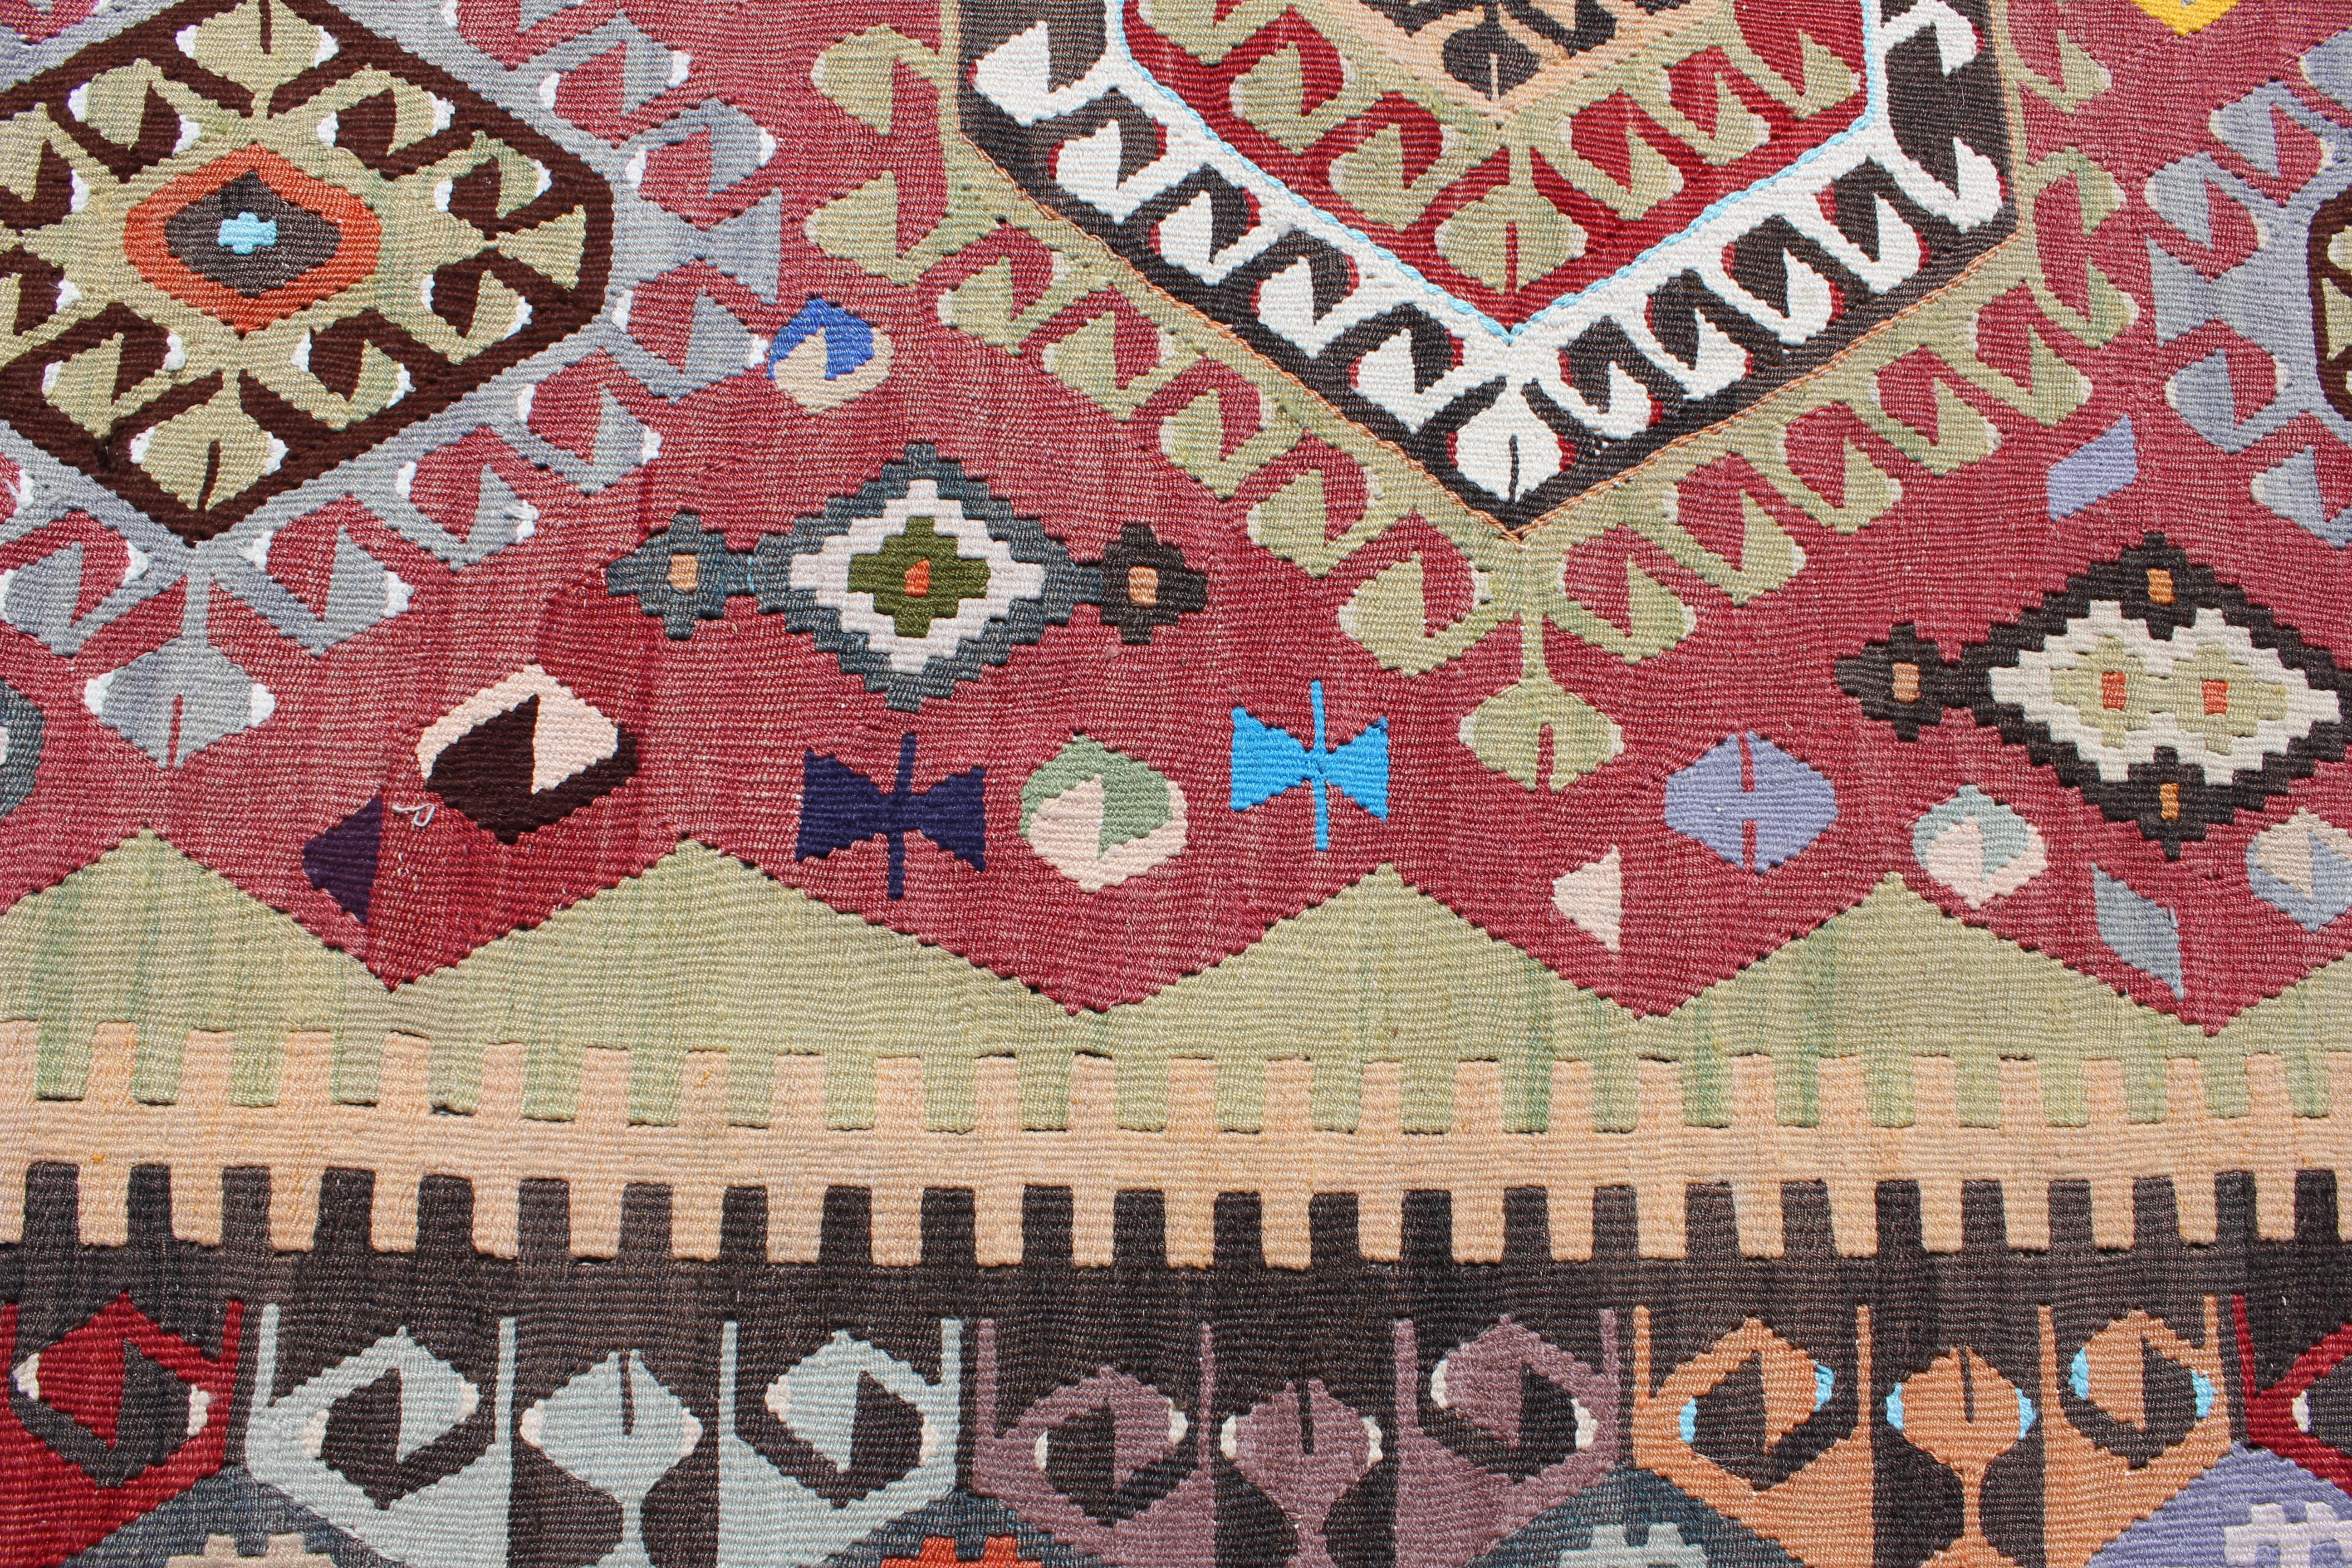 Hand-Woven Tribal Print Wool Turkish Kilim with Red, Brown, and Blue Tones